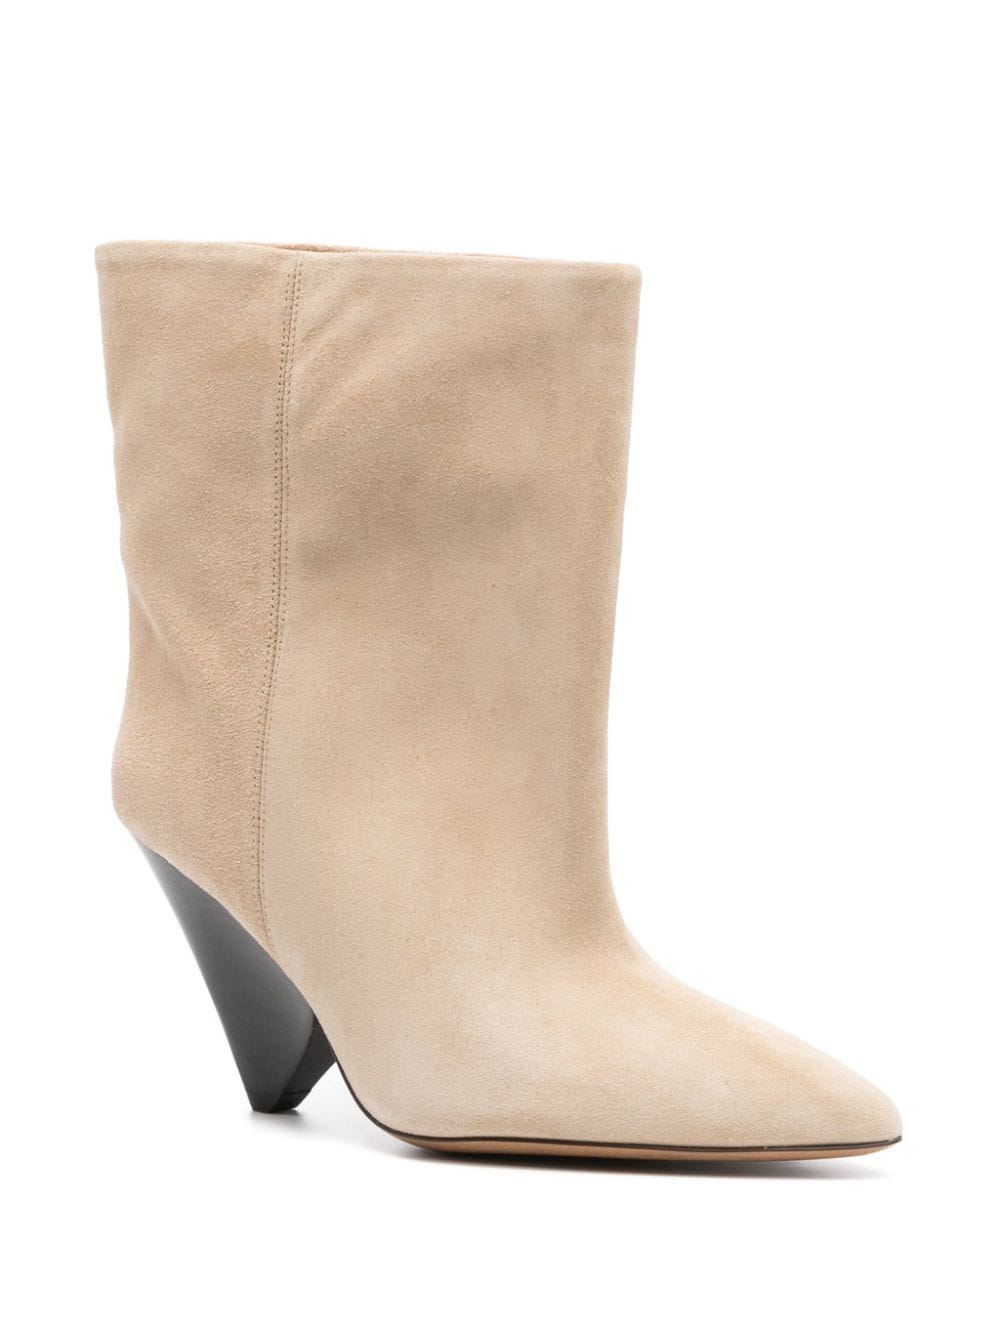 ISABEL MARANT Beige 100% Leather Pointed Toe Boots for Women